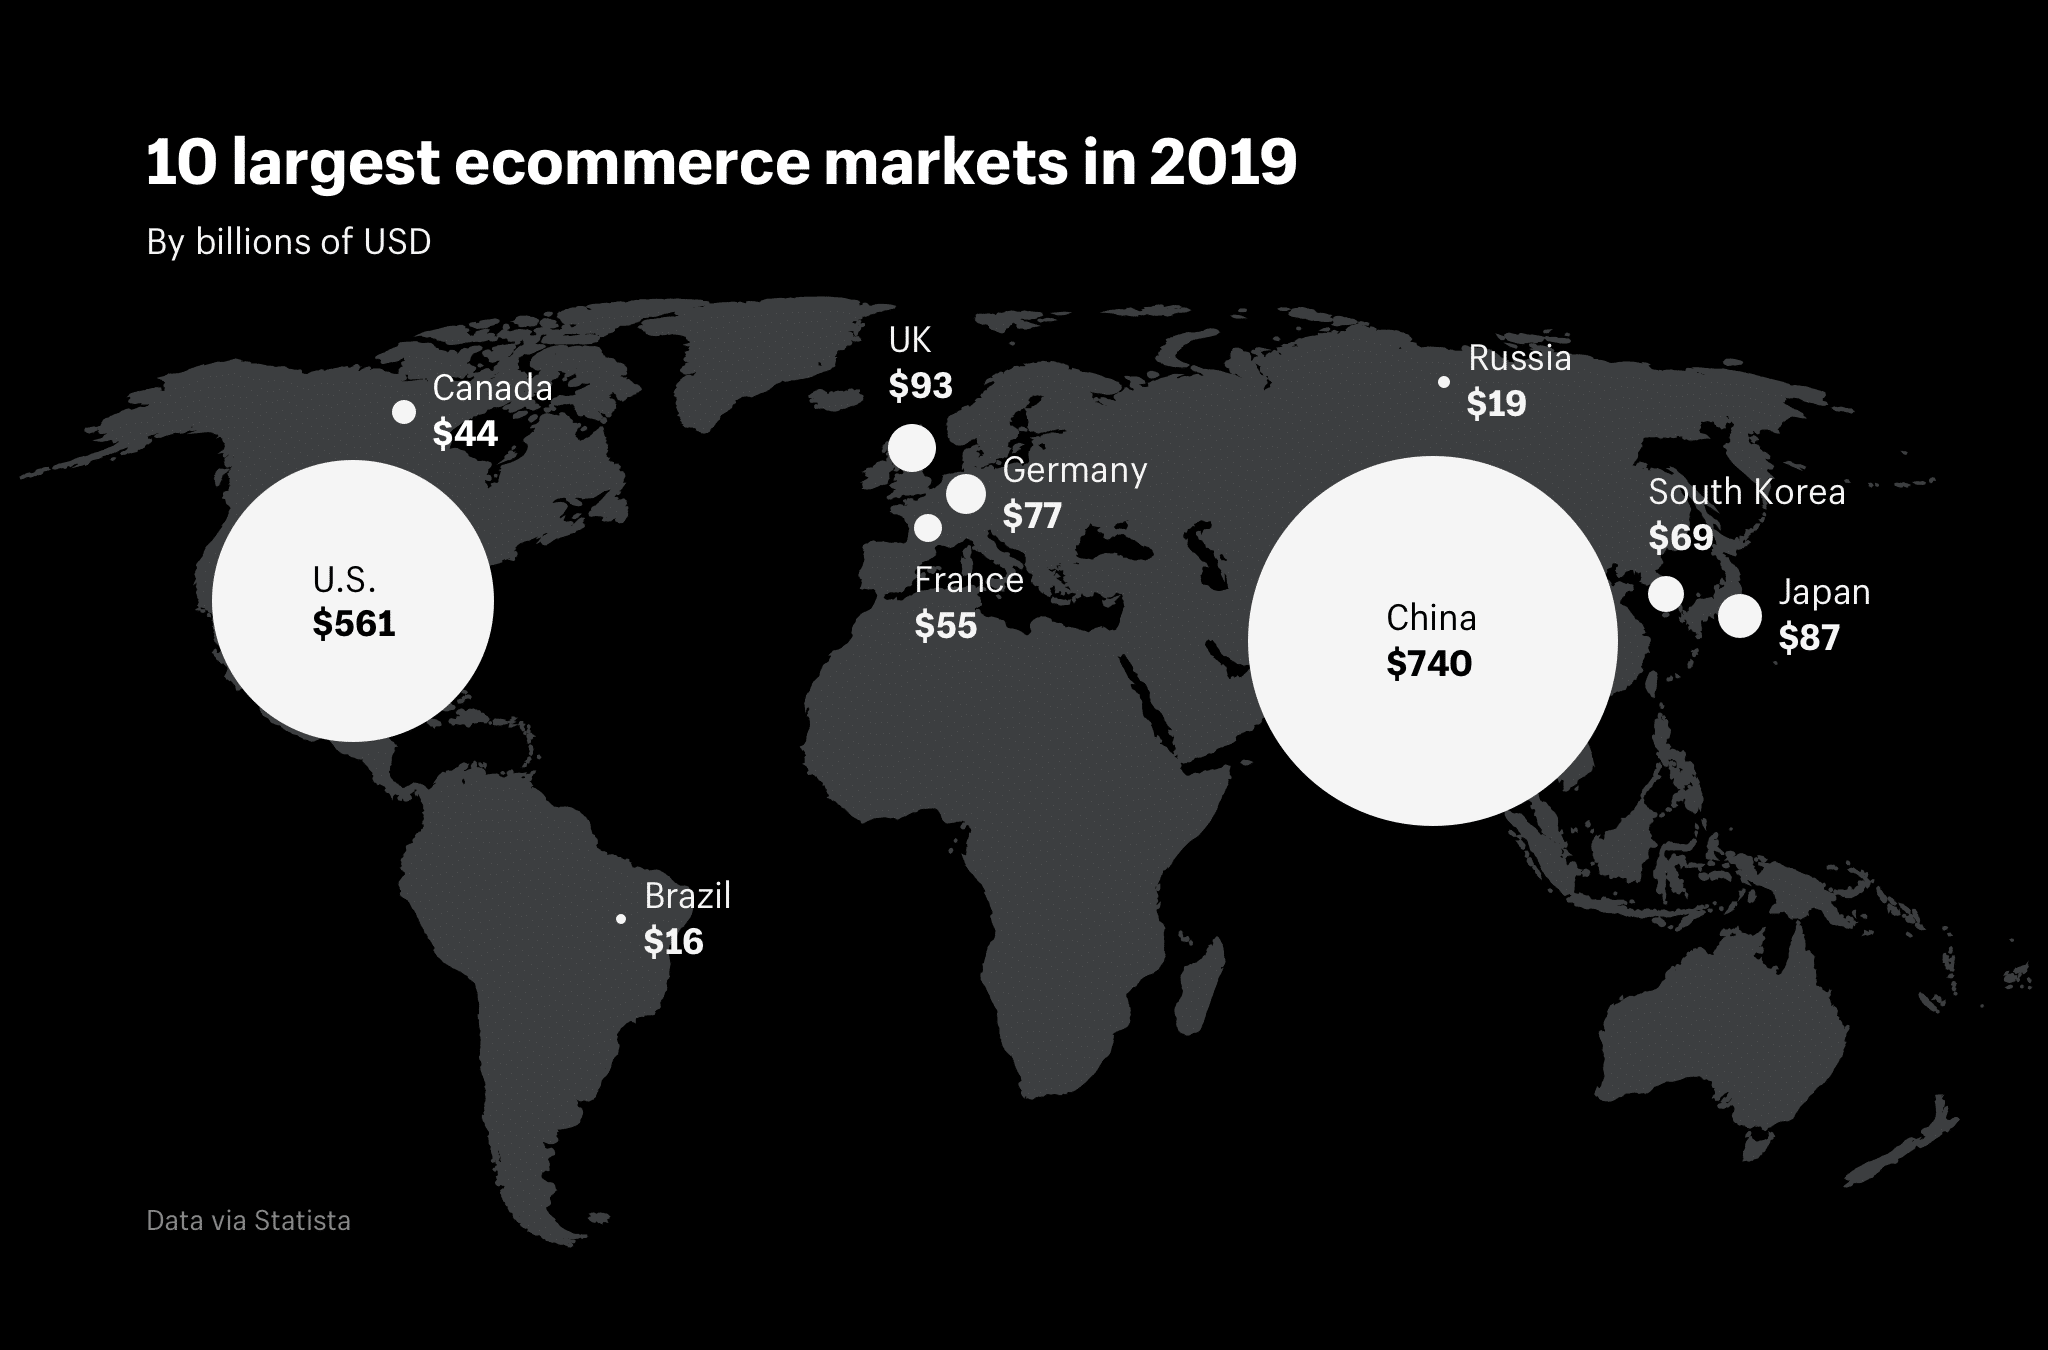 The largest ecommerce markets in the world